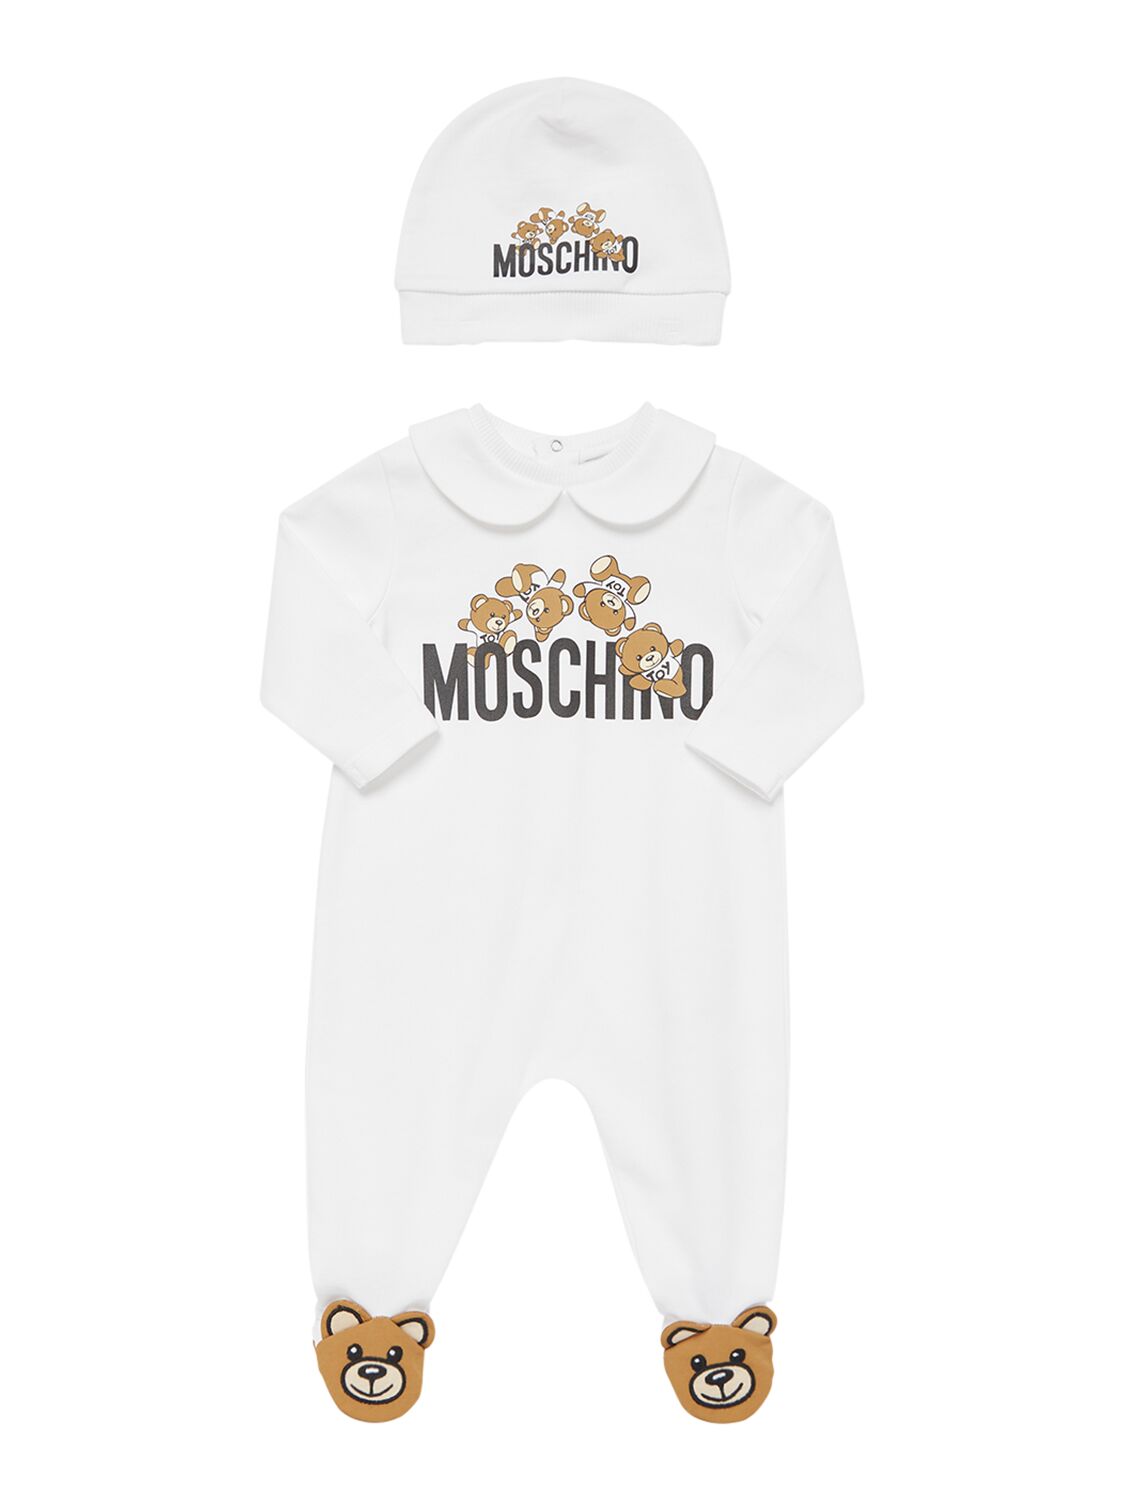 Moschino Babies' Cotton Jersey Romper & Hat In White